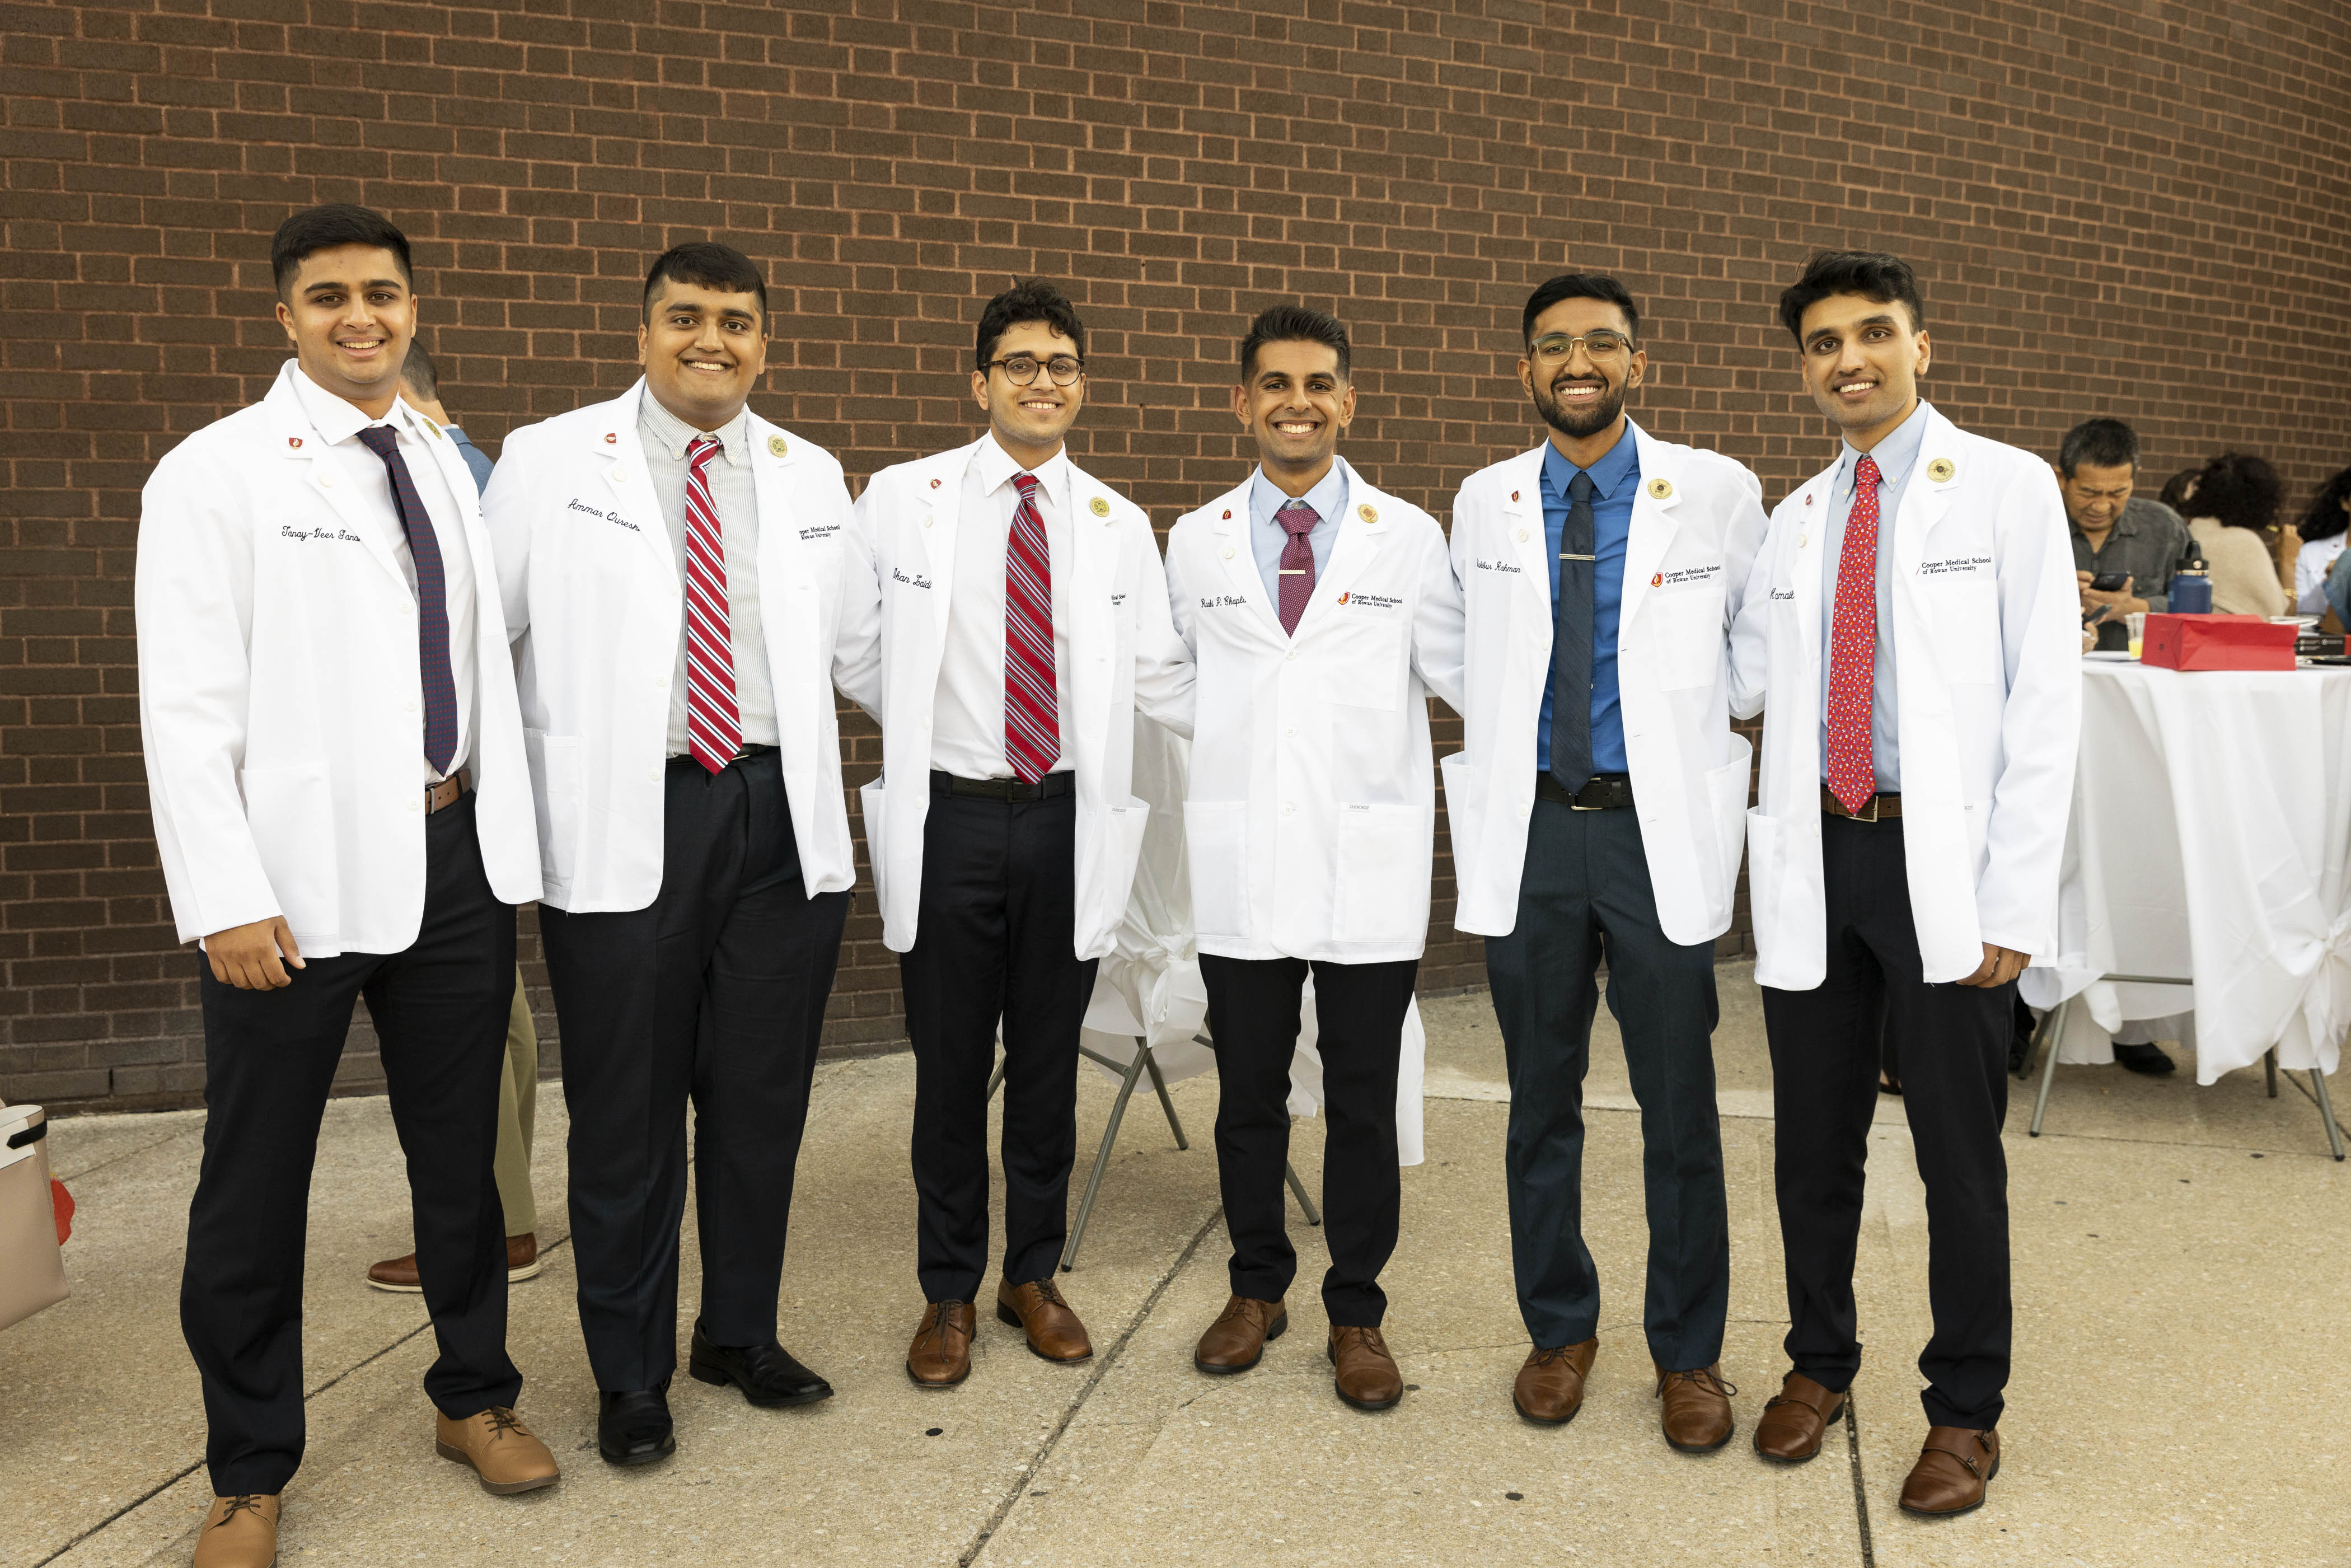 CMSRU welcomes new medical students during annual White Coat Ceremony |  Rowan Today | Rowan University